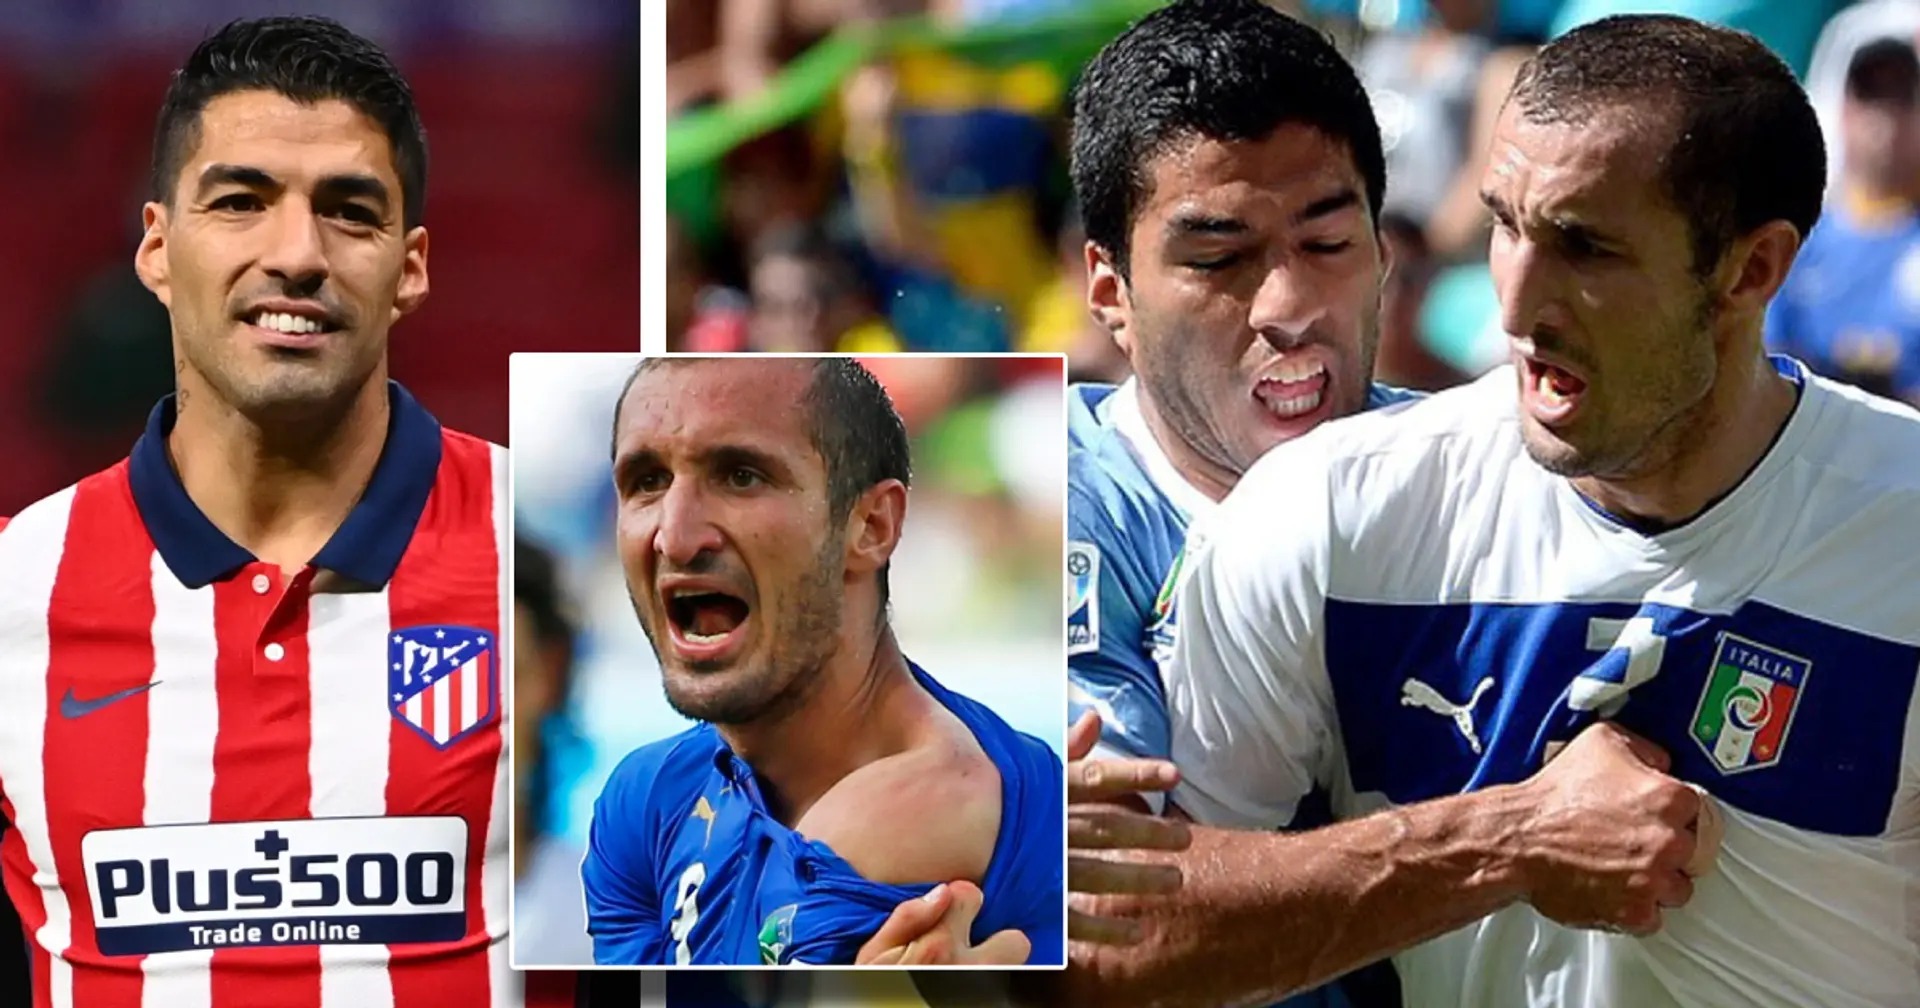 Luis Suarez could soon become teammates with Giorgio Chiellini as he leaves Atletico as a free agent